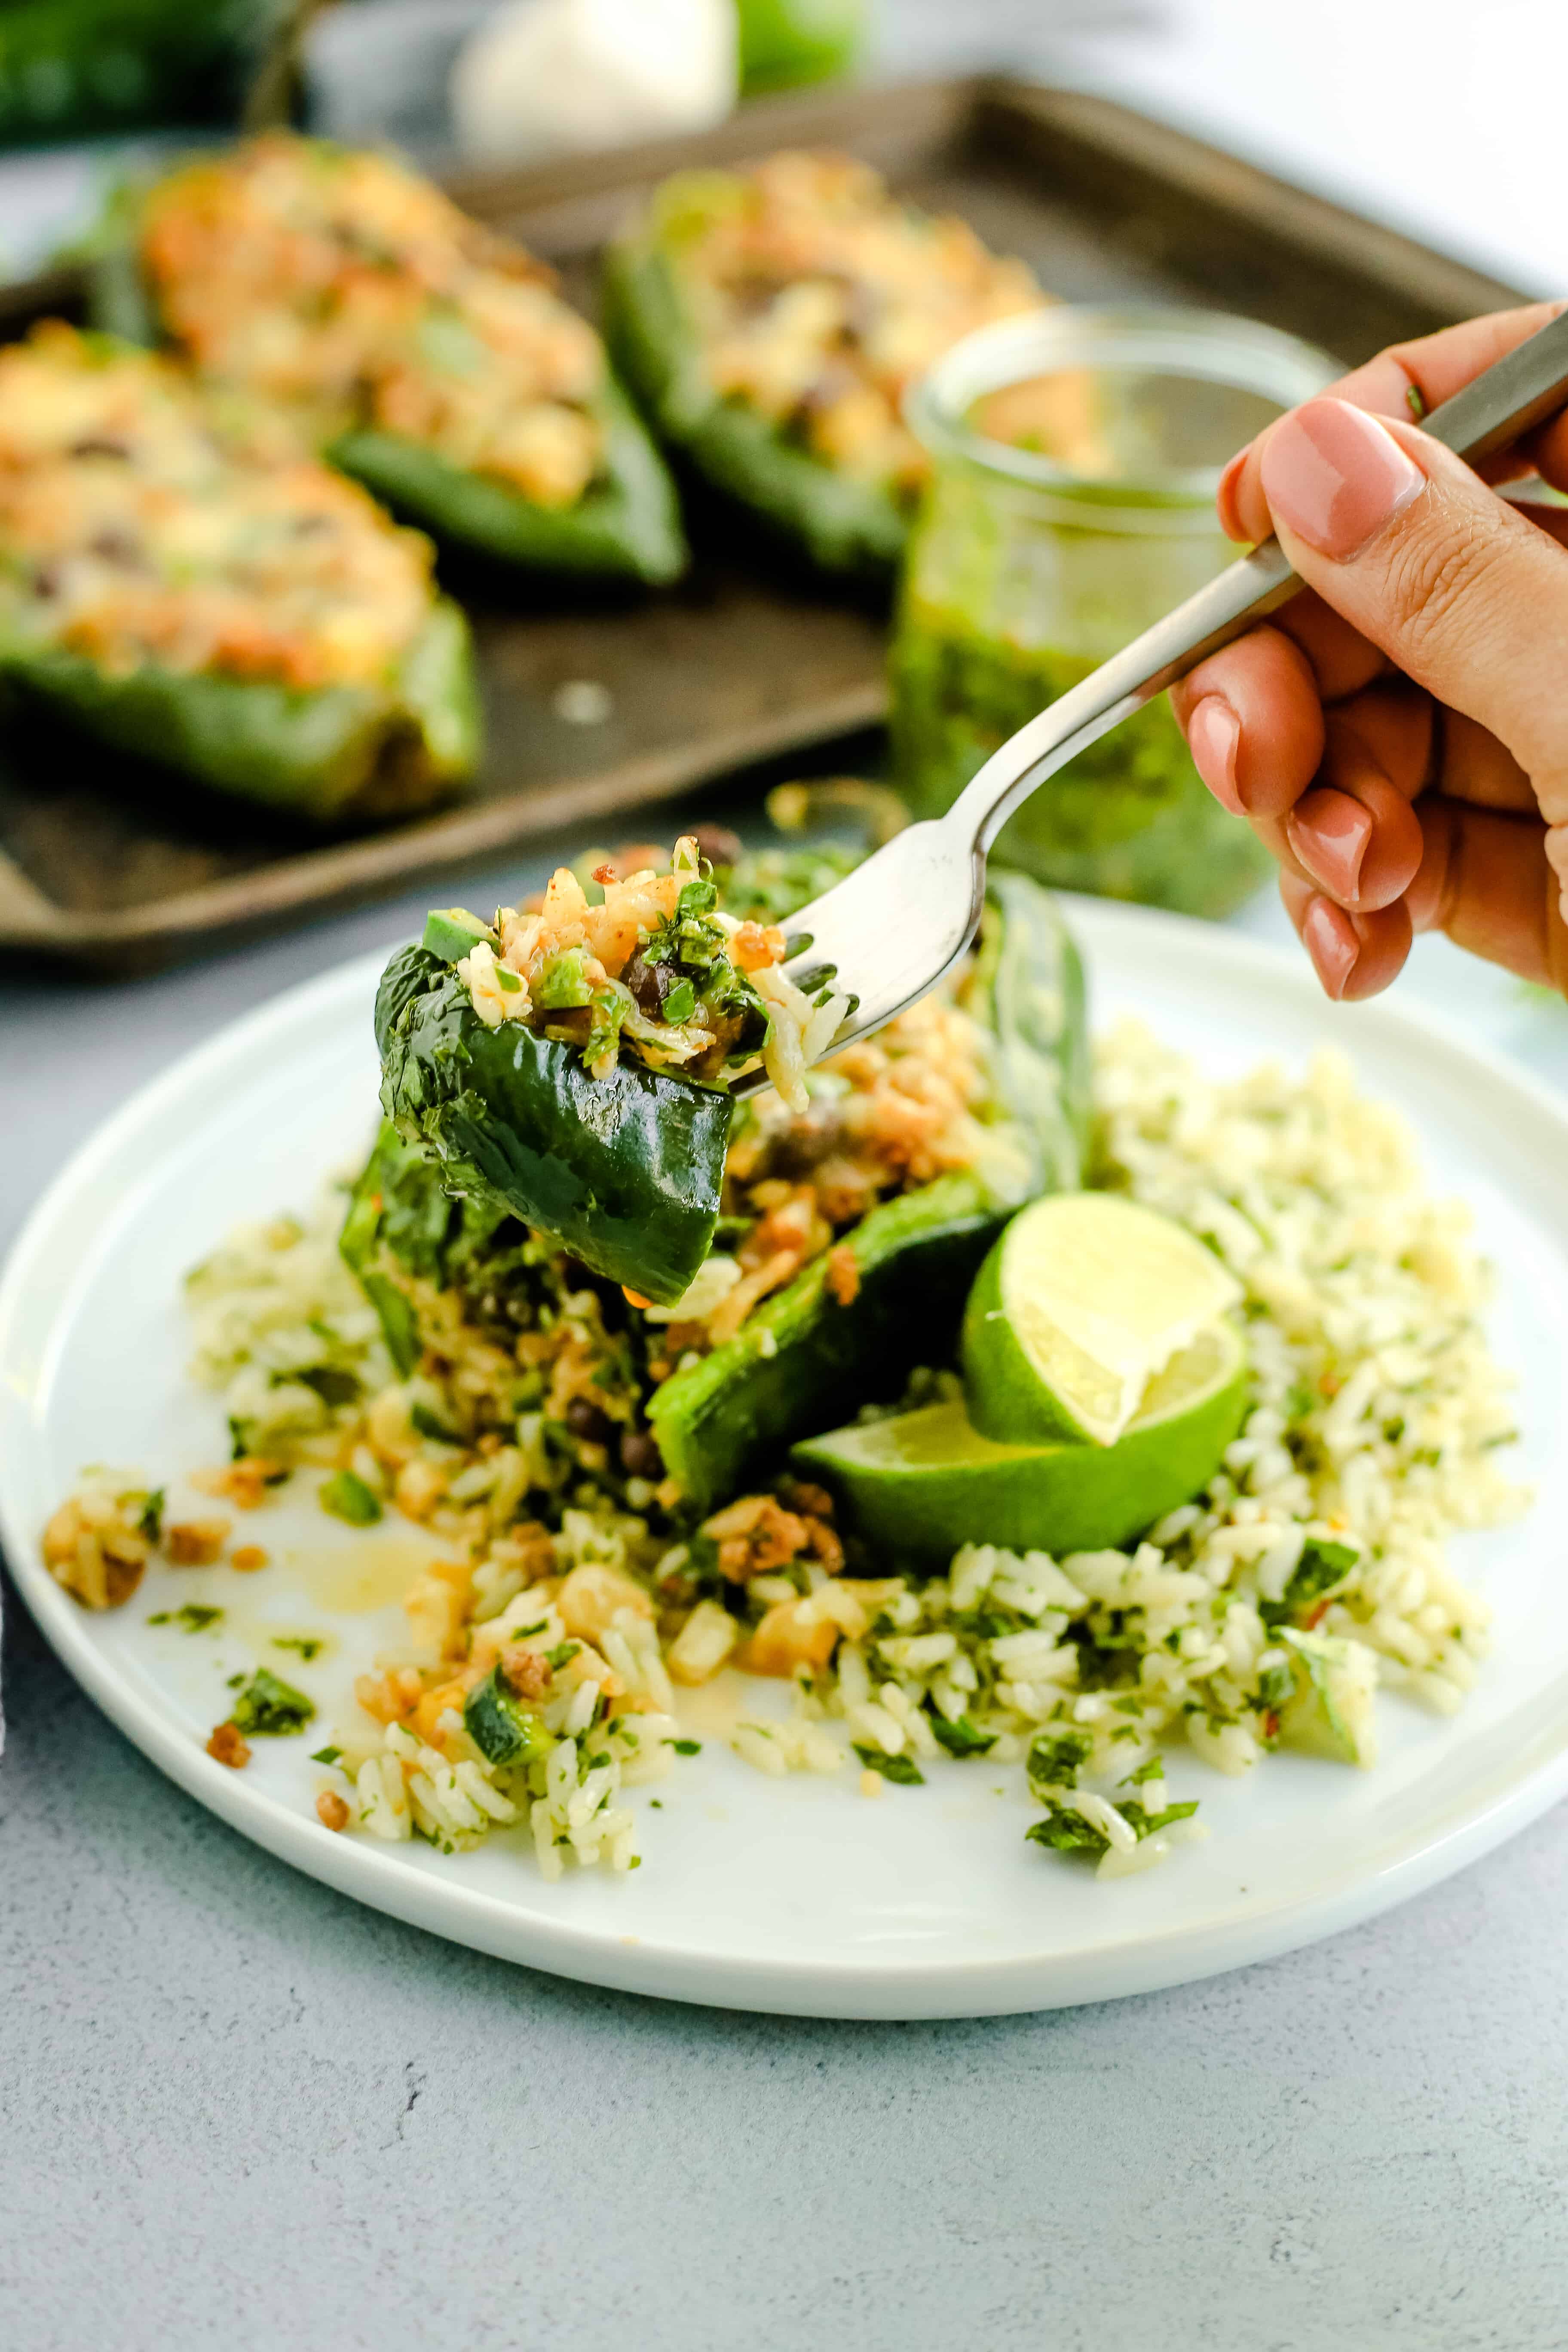 A woman's hand holds a silver fork that's balancing a full bite of stuffed poblano peppers, covered with melted cheese and chimichurri sauce while the rest of the meal is plated and within view in the background